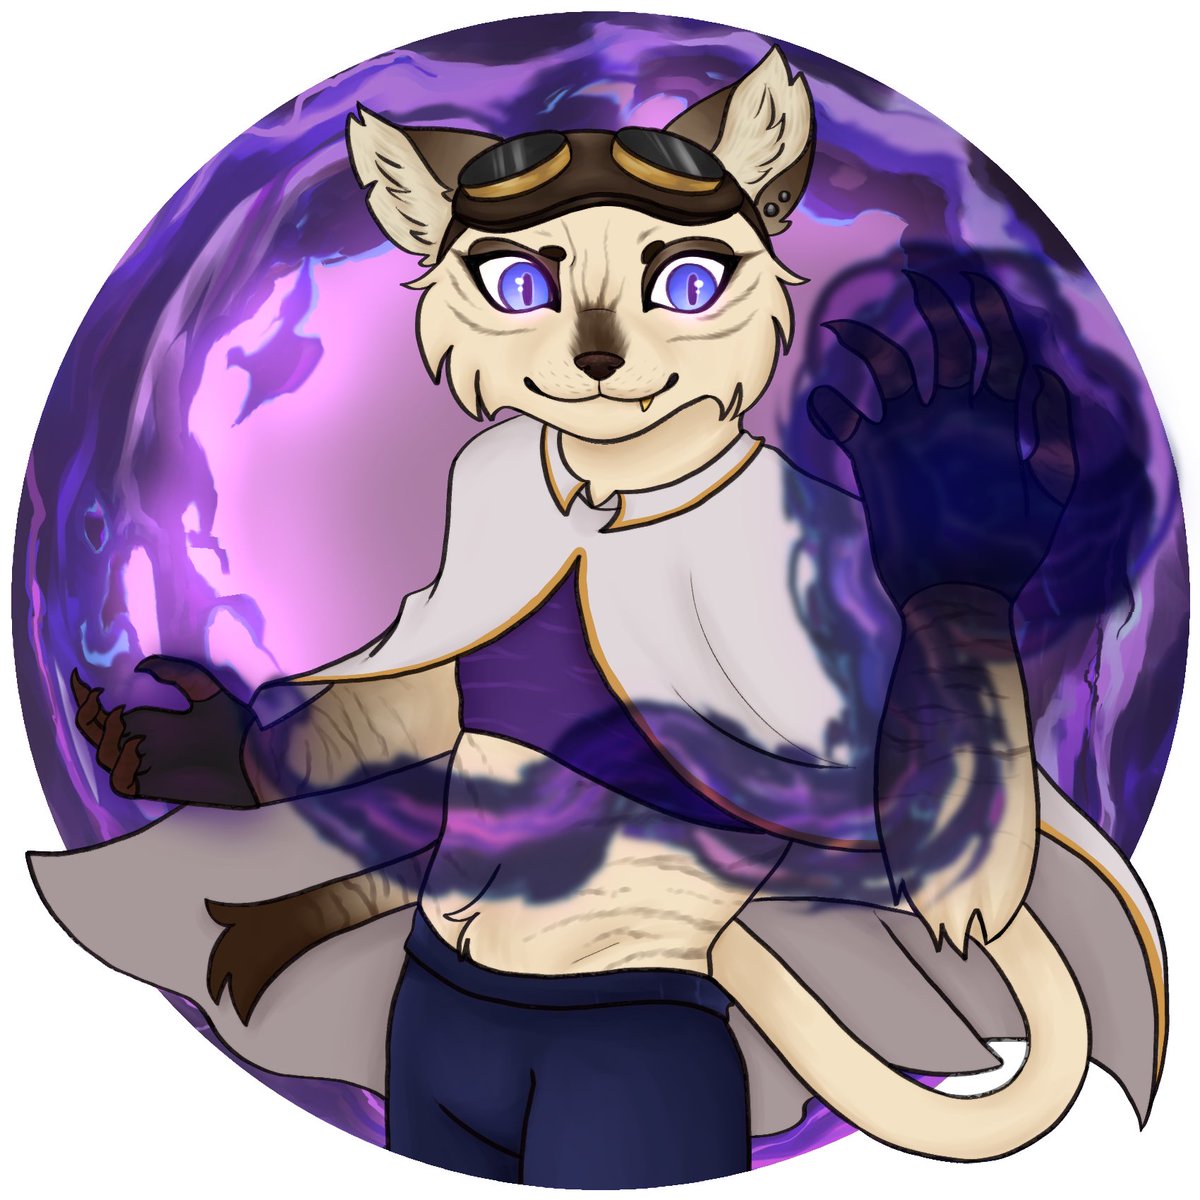 Le gasp, a token commision for online dnd!! anyway funky shadow magic catfolk
-
#dnd #ttrpgs #pathfinder2e #PF2e #commission